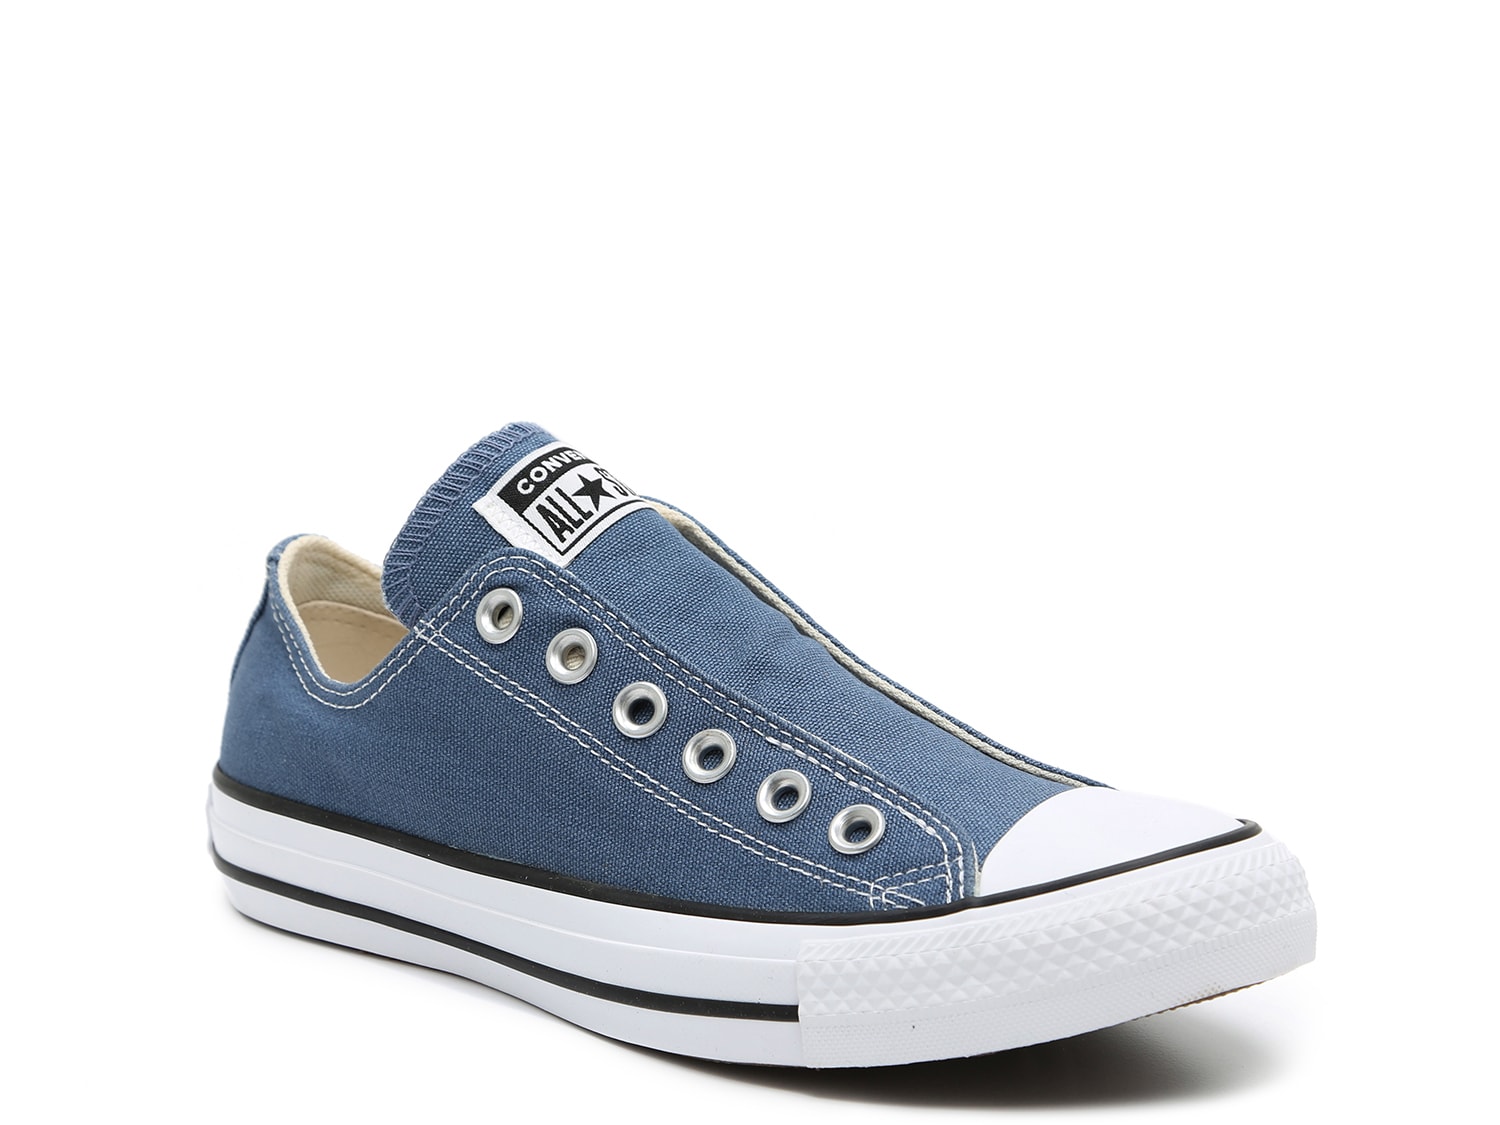 Converse Slip-On Shoes | DSW